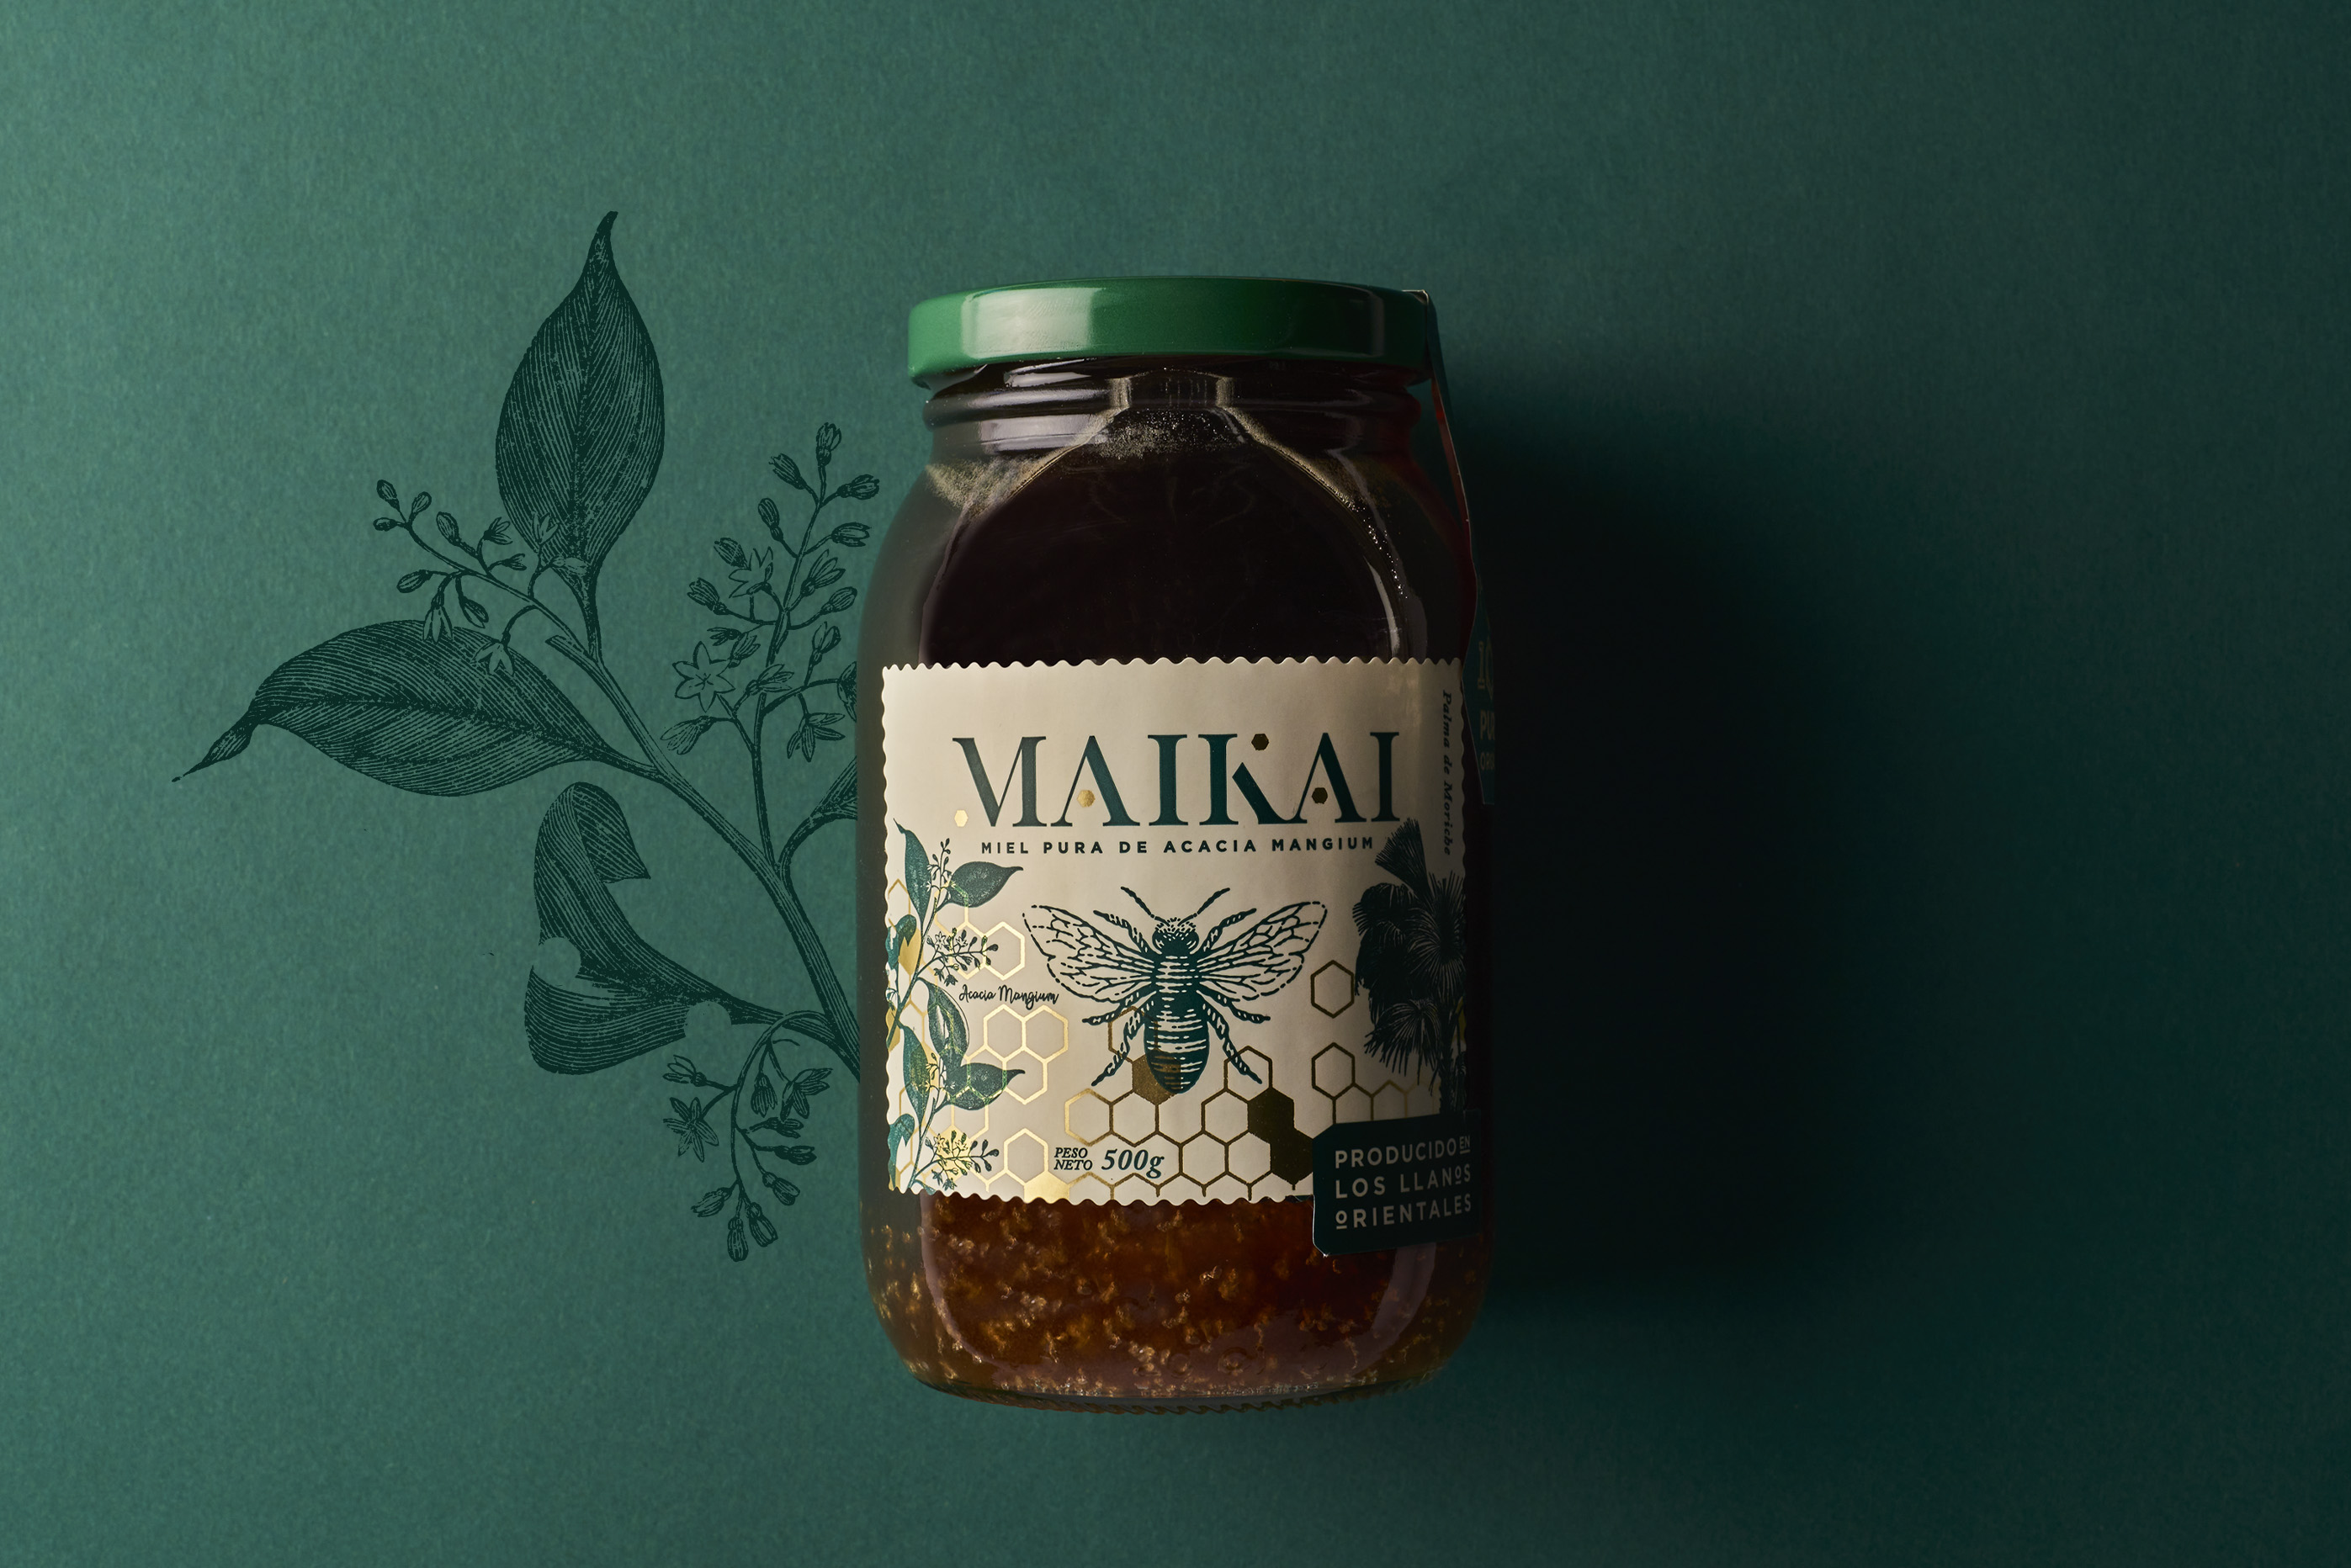 scd Creates a New Packaging Design for Maikai - World Brand Design Society